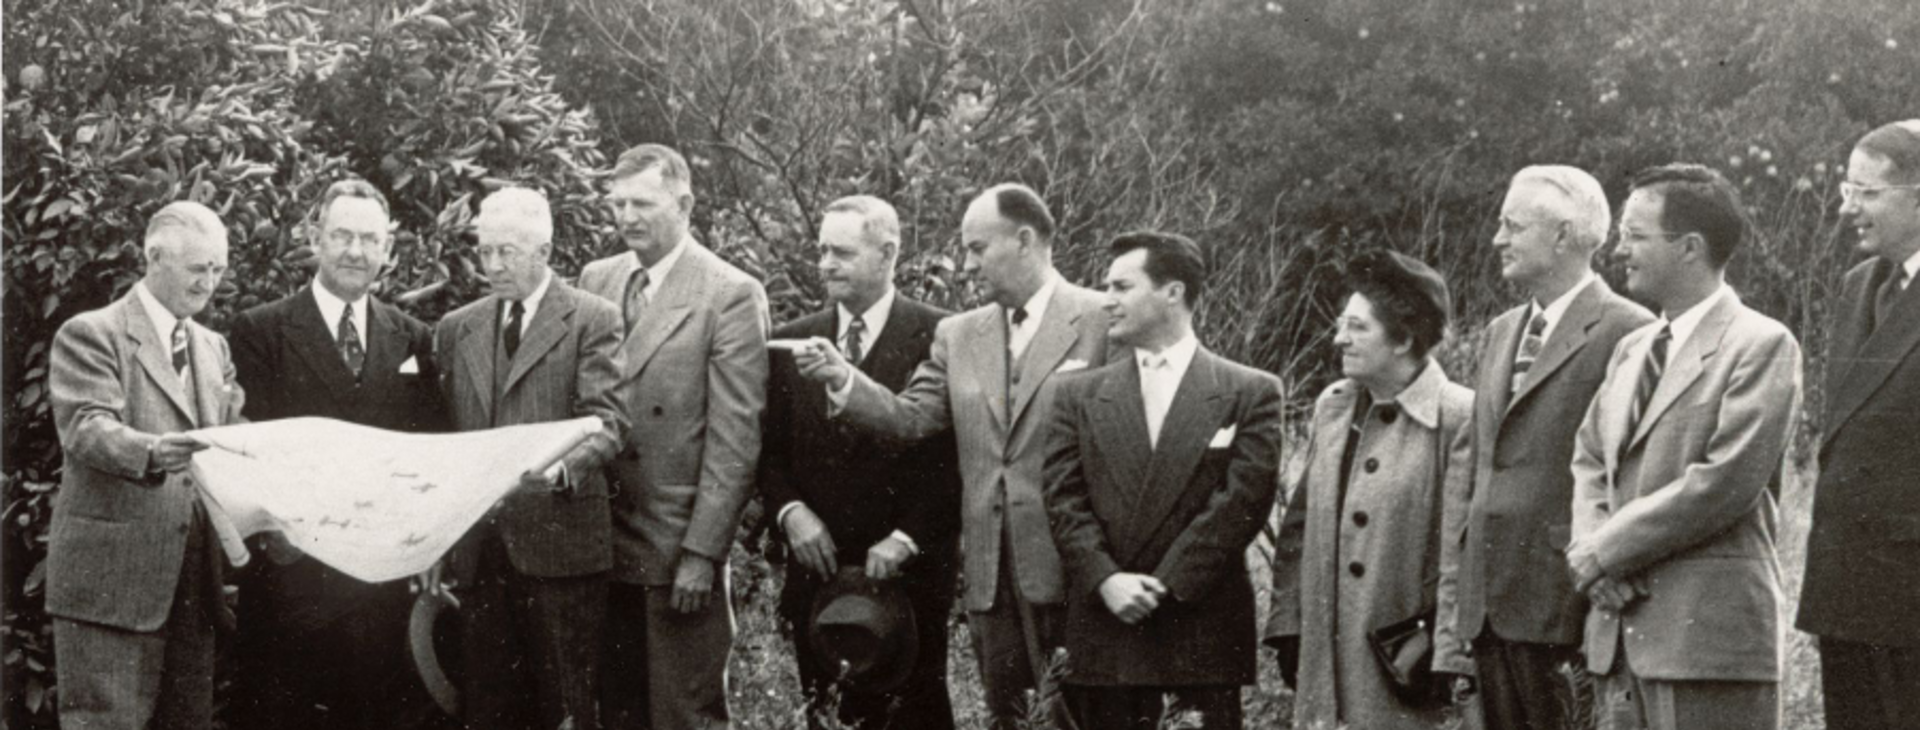 old photo from 1952 of groundbreaking